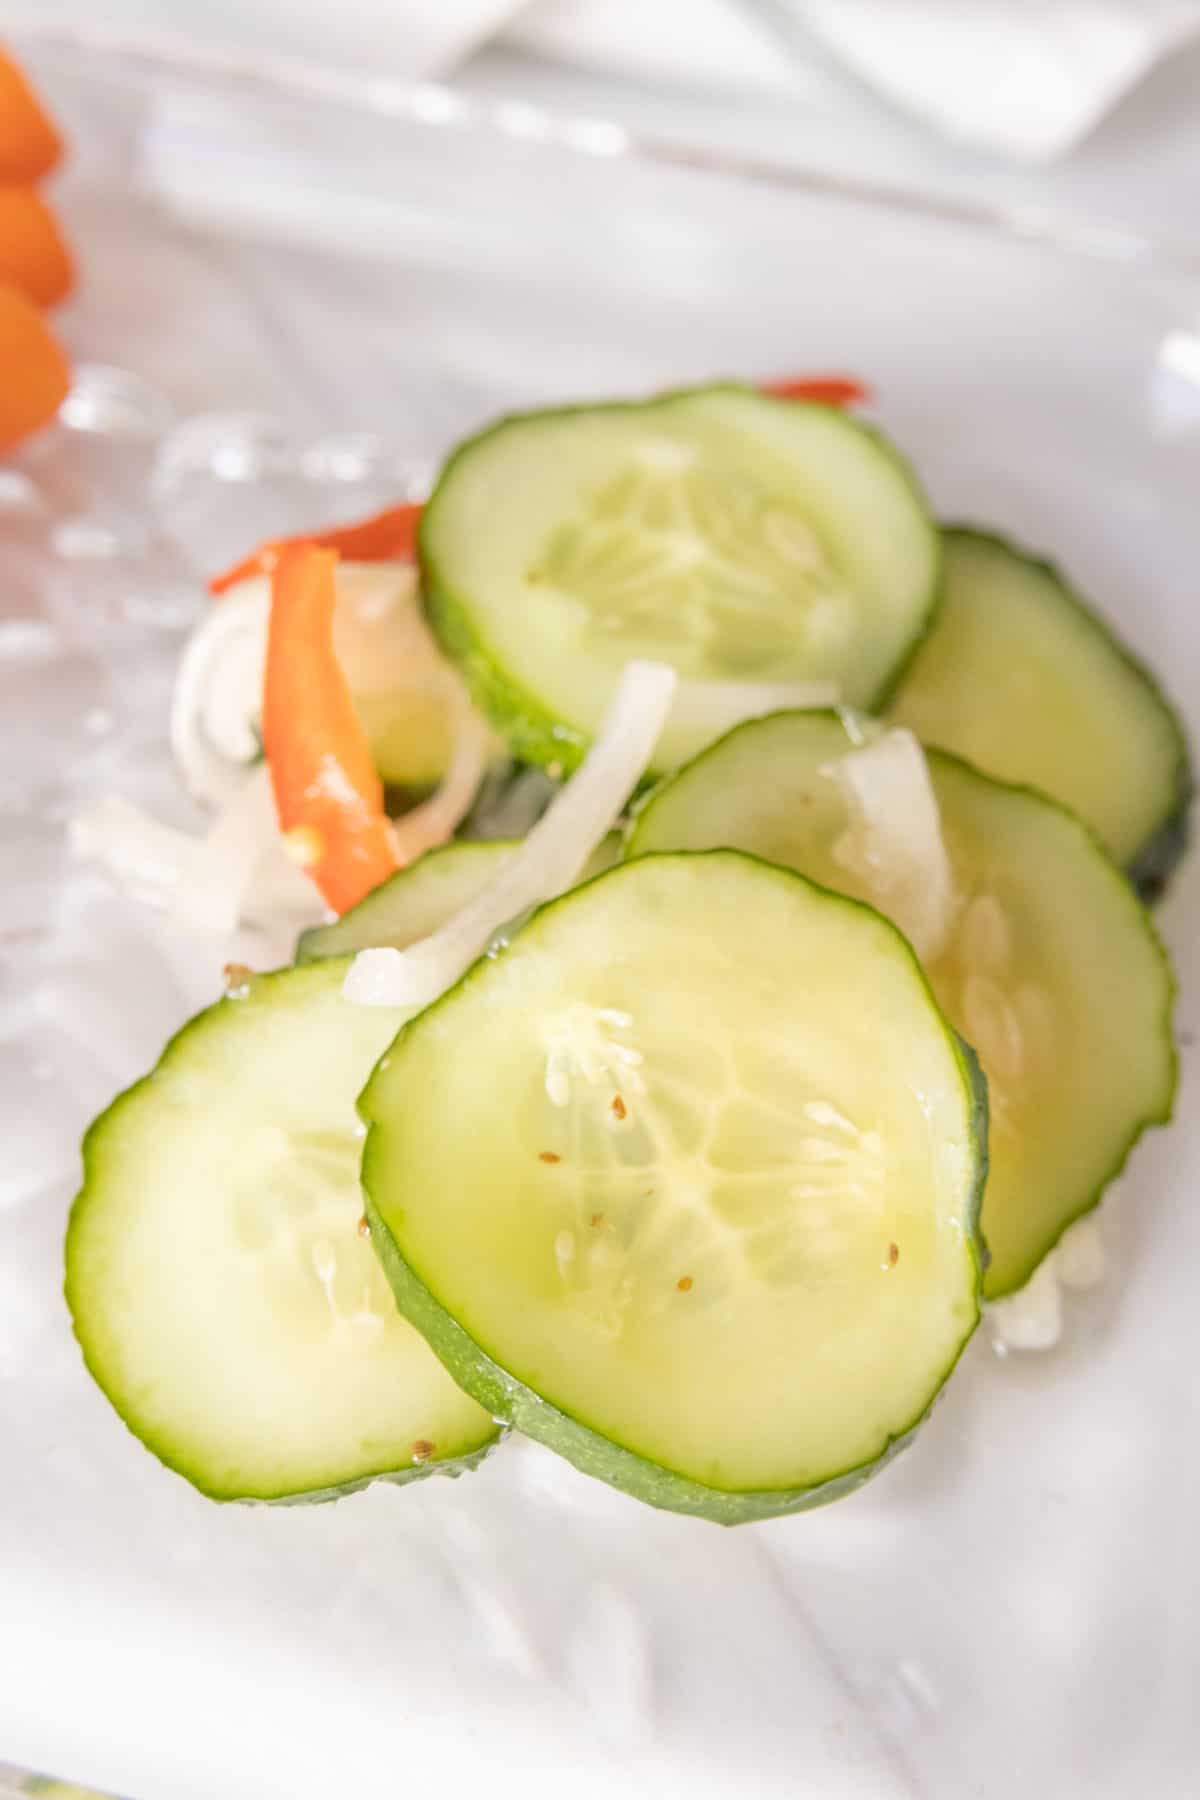 Sliced cucumber pickles and carrots on a white plate.